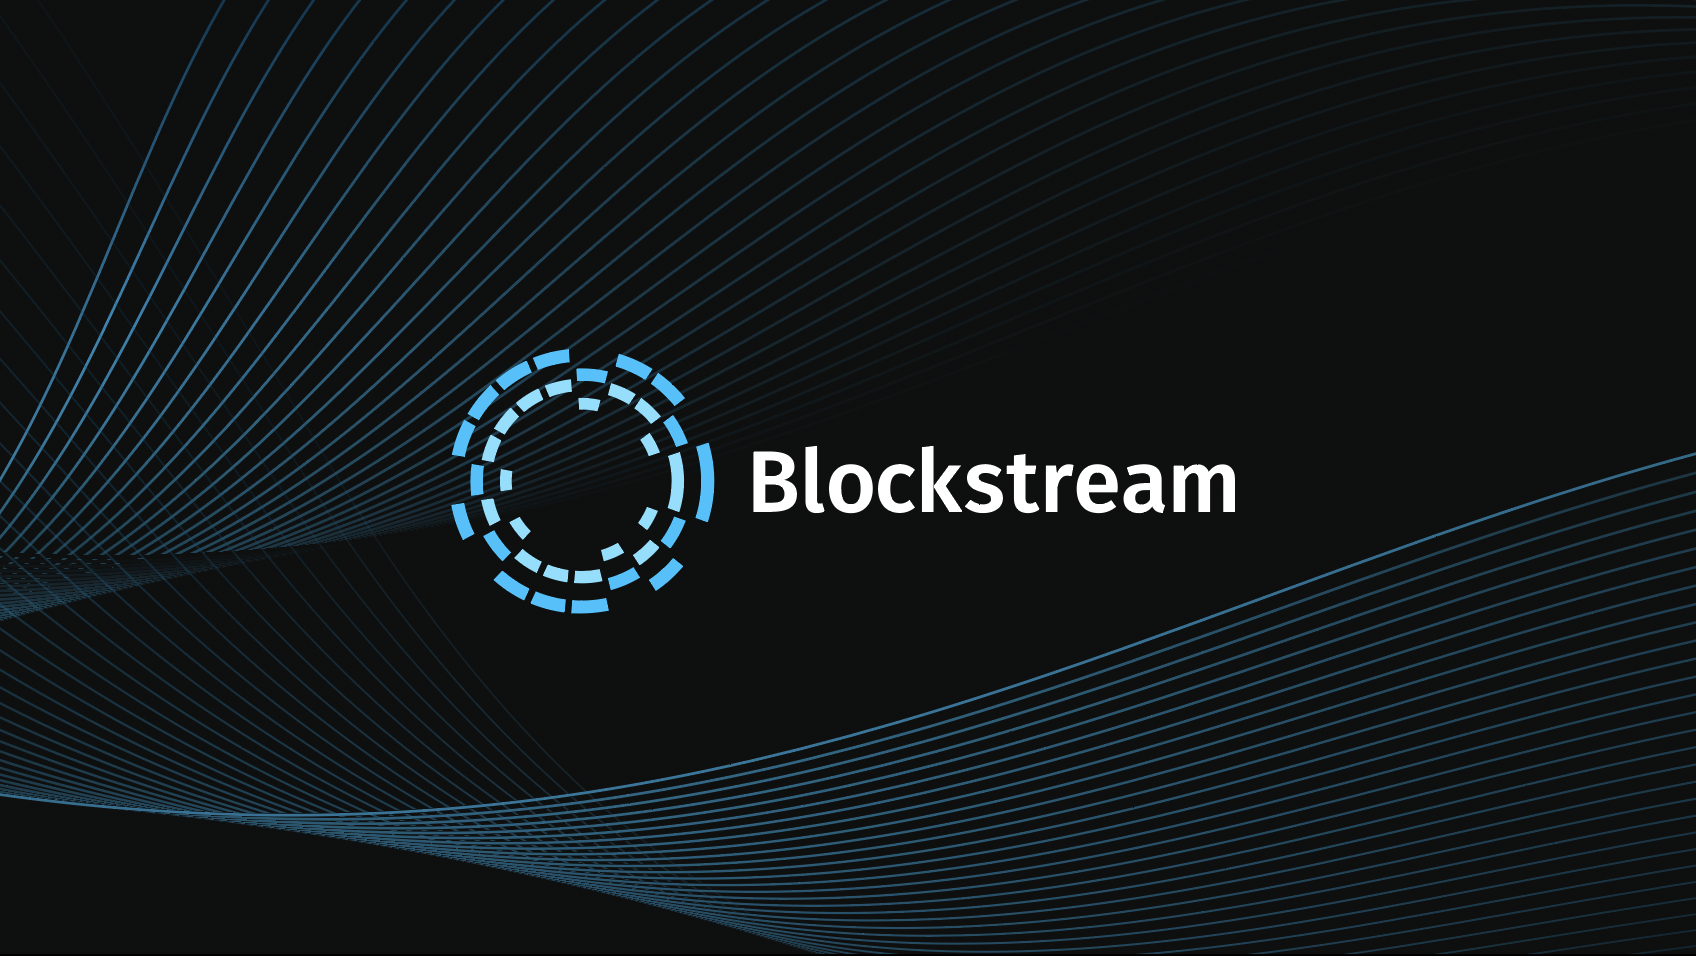 Blockstream Holds Inaugural Media Briefing to Showcase Bitcoin Innovation Breakthroughs